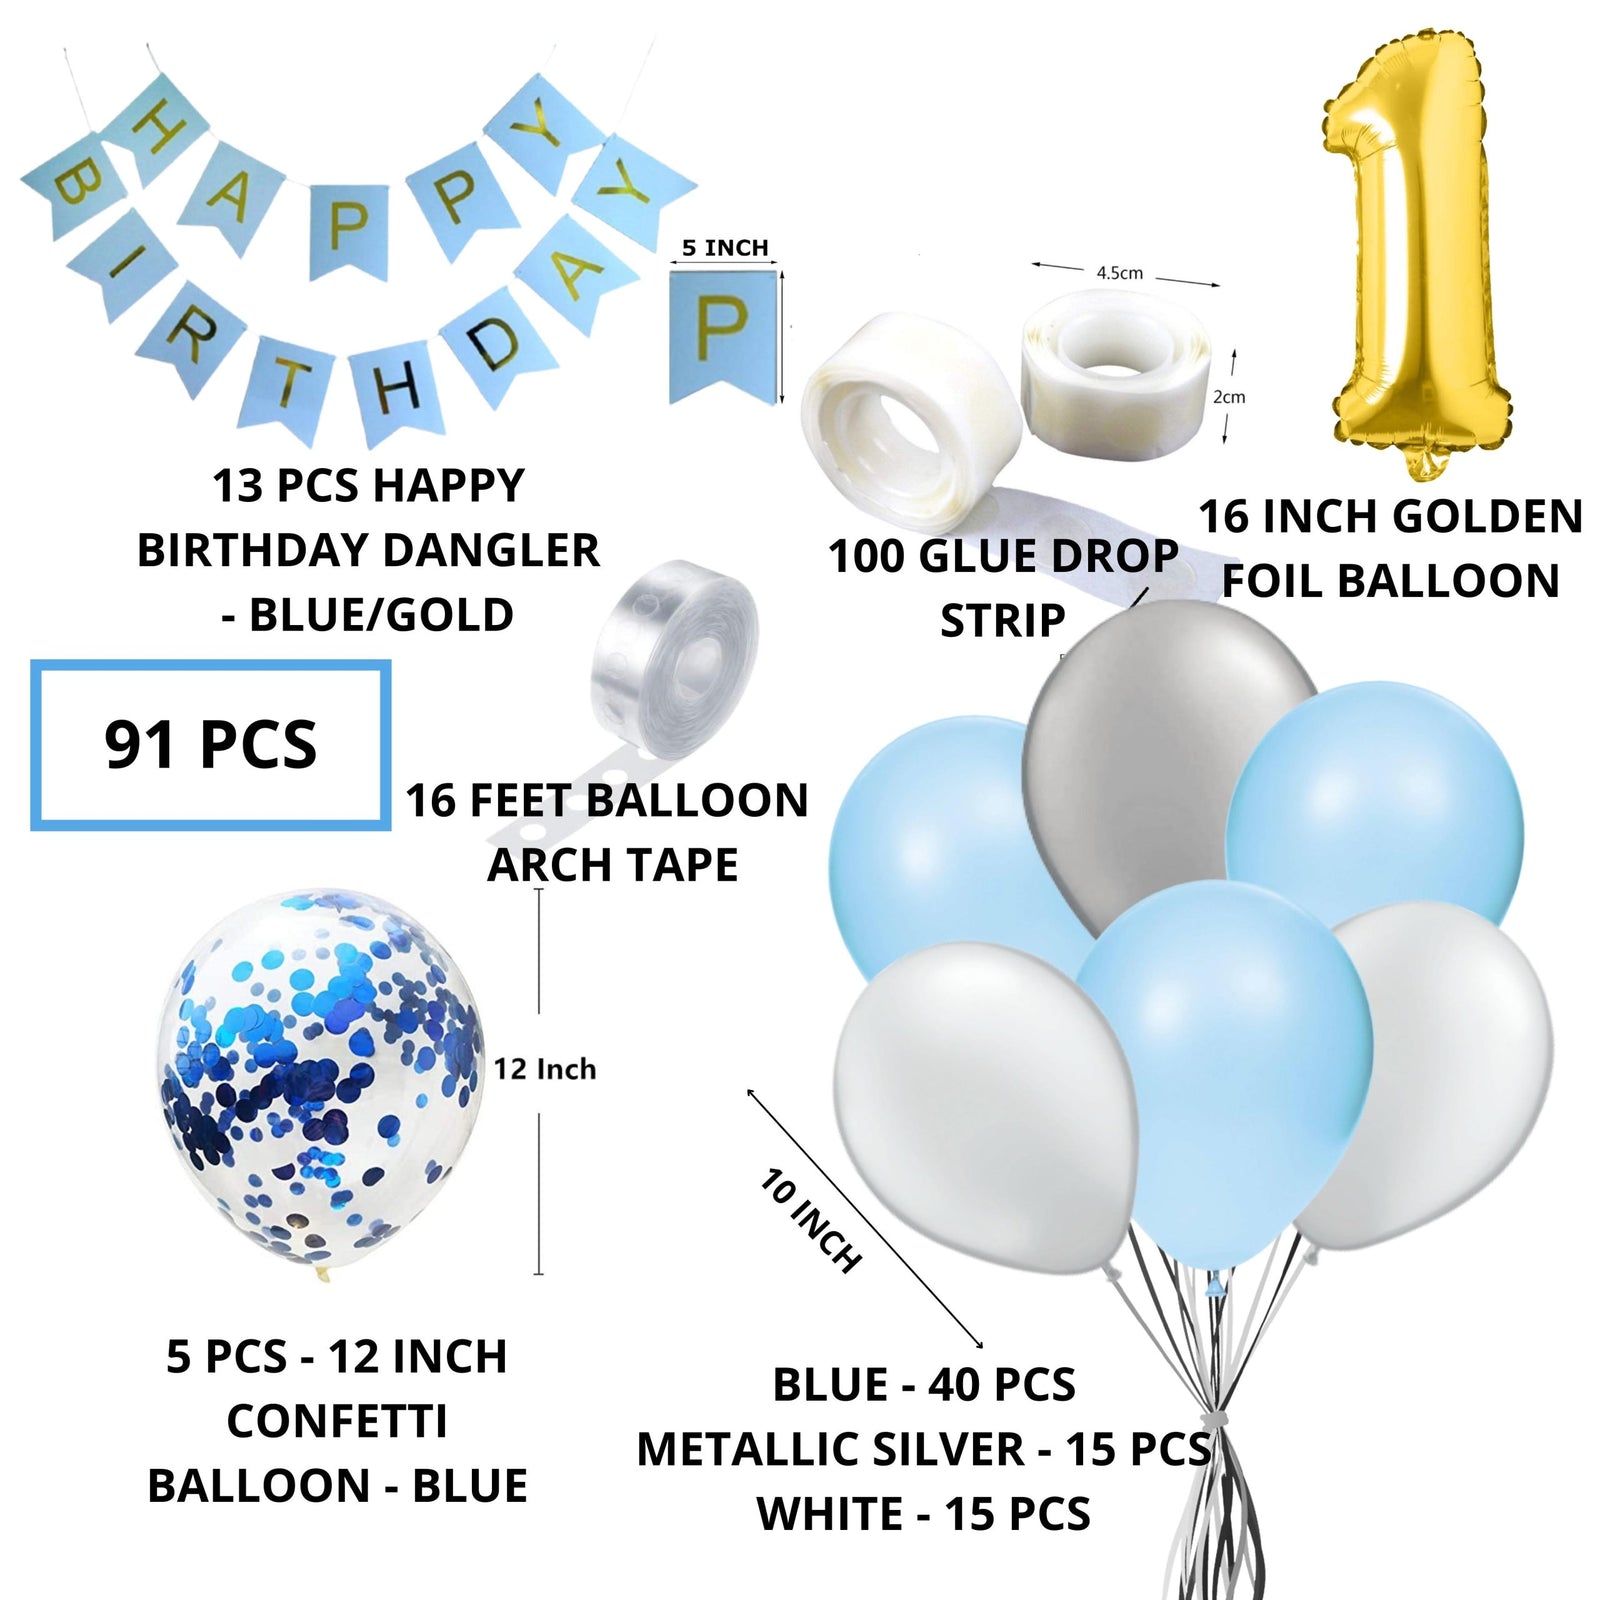 Gold and silver blue Birthday Party Decoration Set，Including Happy Birthday  Banner, Balloons, Metallic Fringe Curtain, Golden Crown, Suit Perfect For